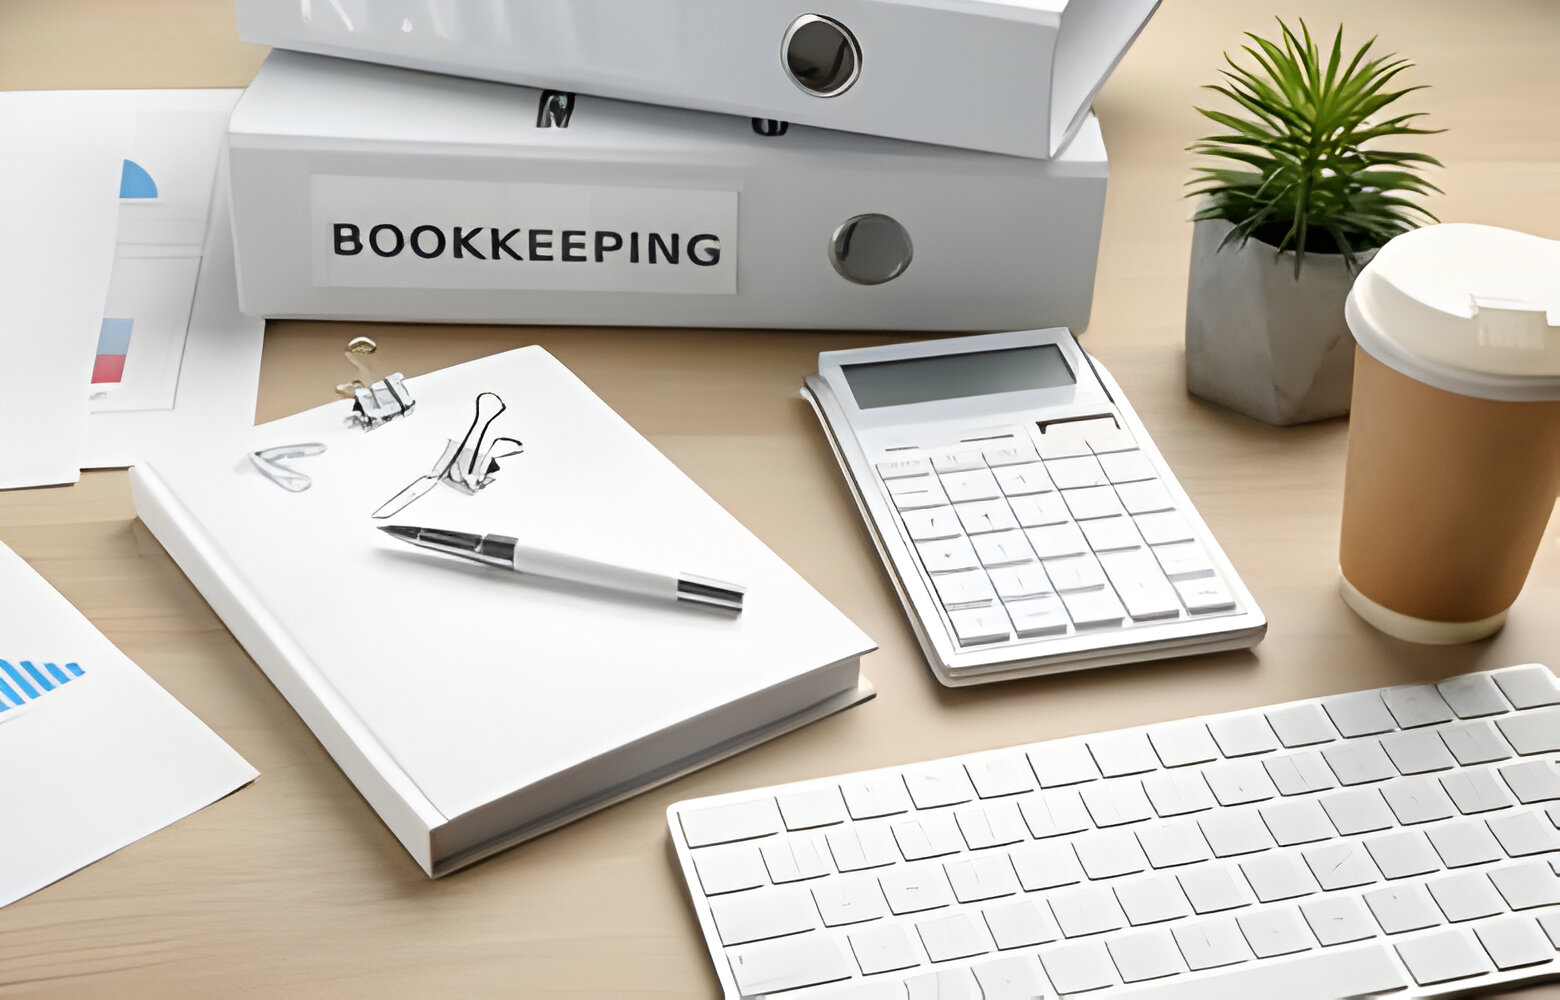 What would force a business owner to hire a bookkeeper?
